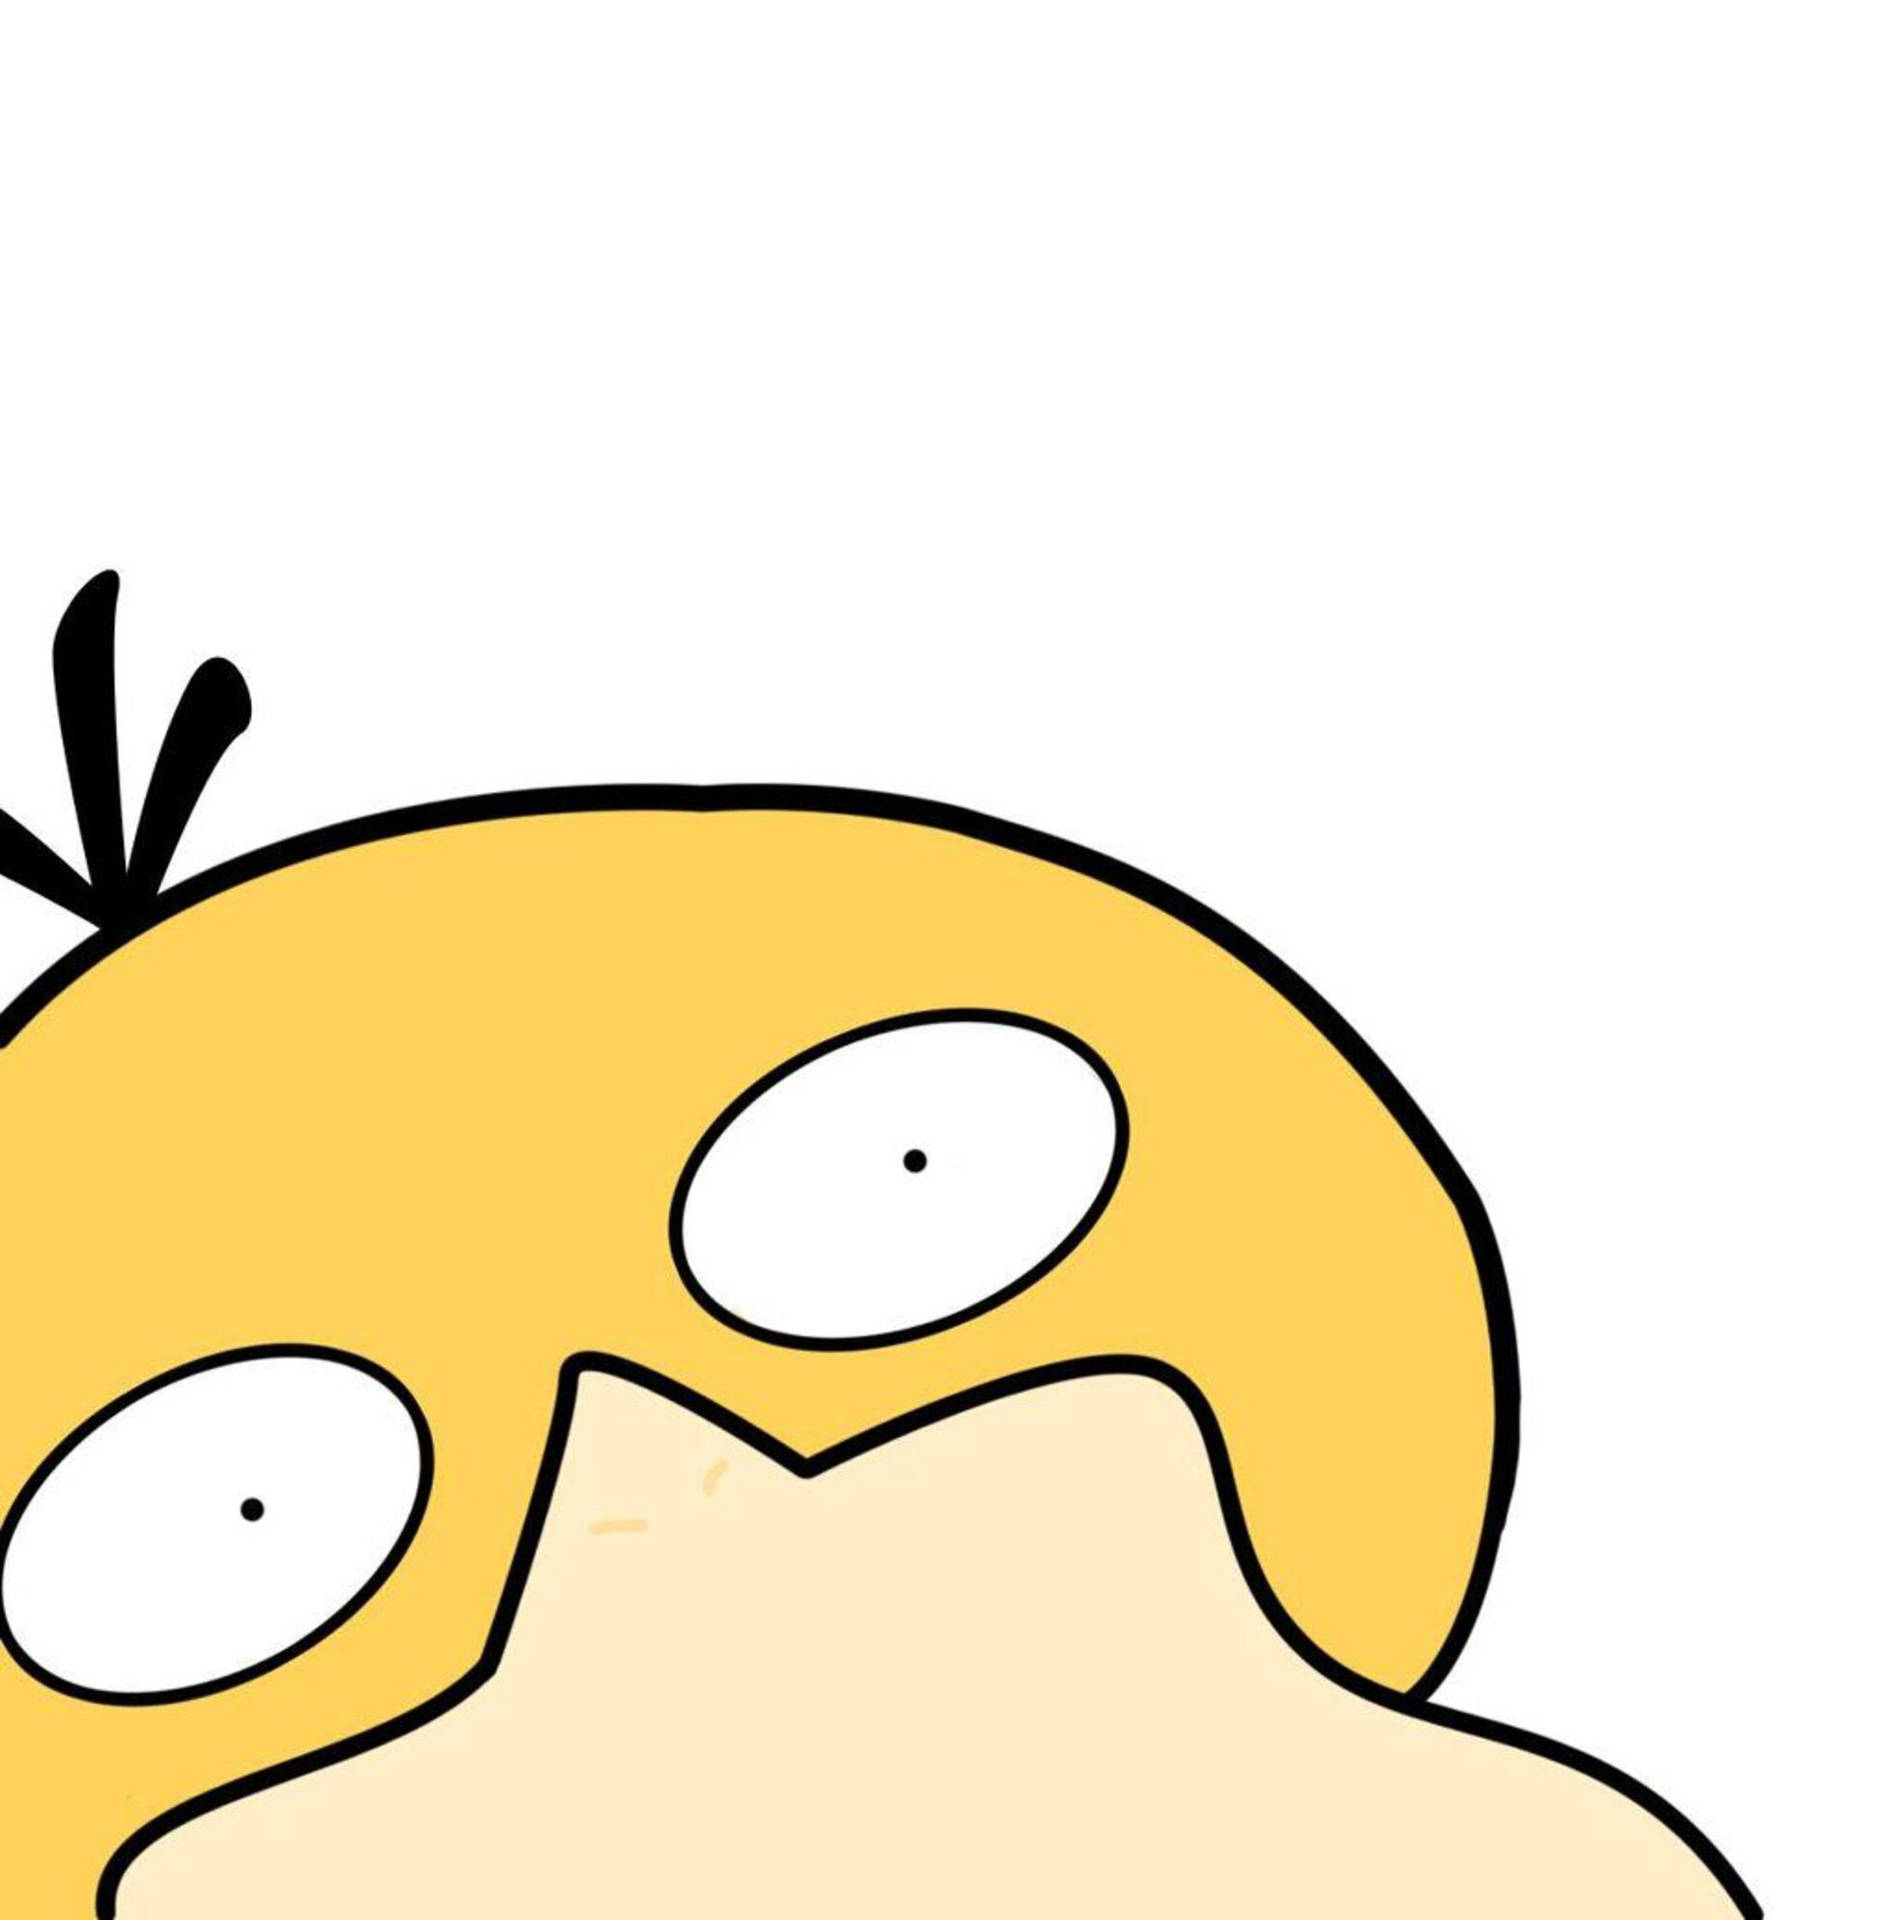 You'll Be Surprised By What This Peeking Psyduck Can Do. Background